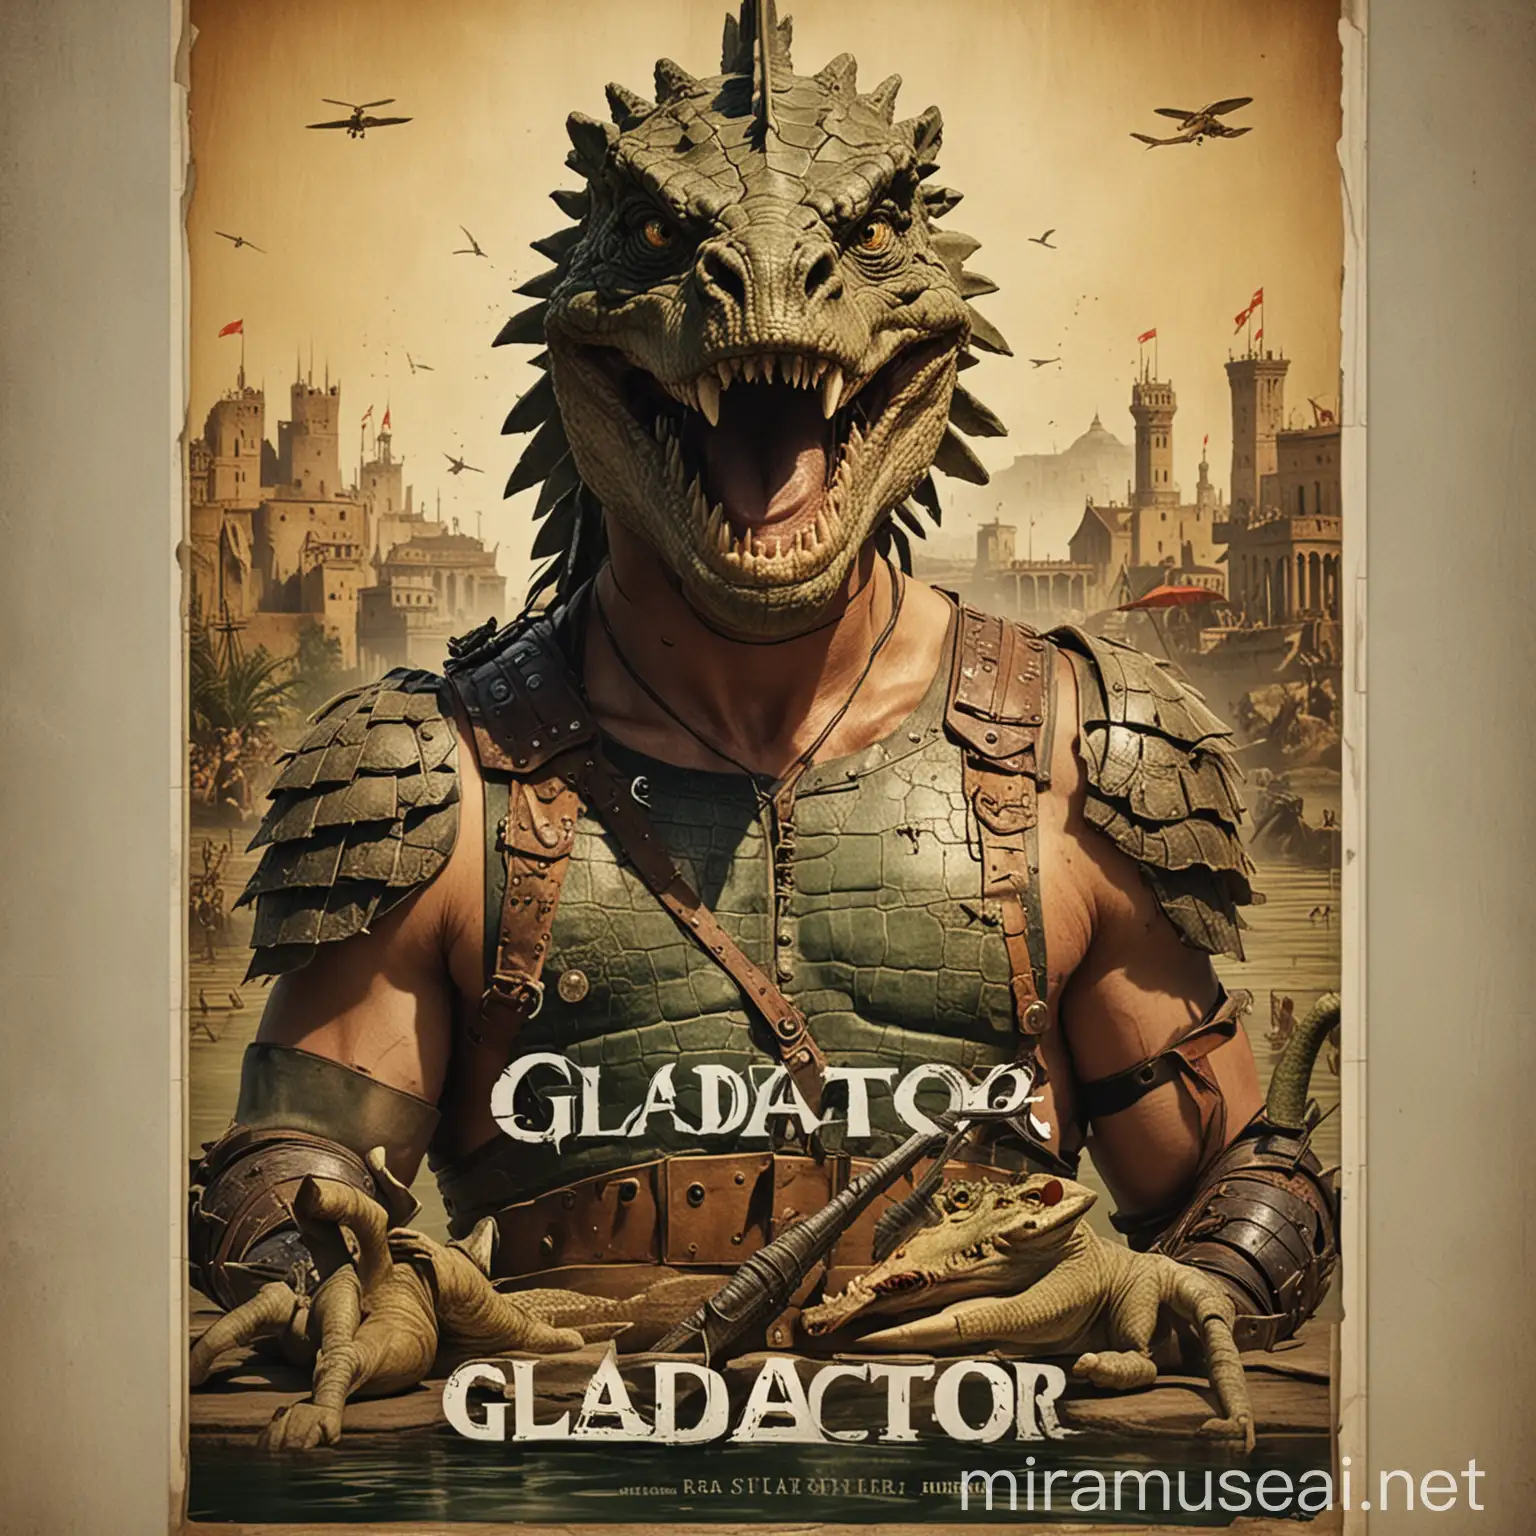 Poster for Gladiator with characters as crocodiles in the style of Bosch